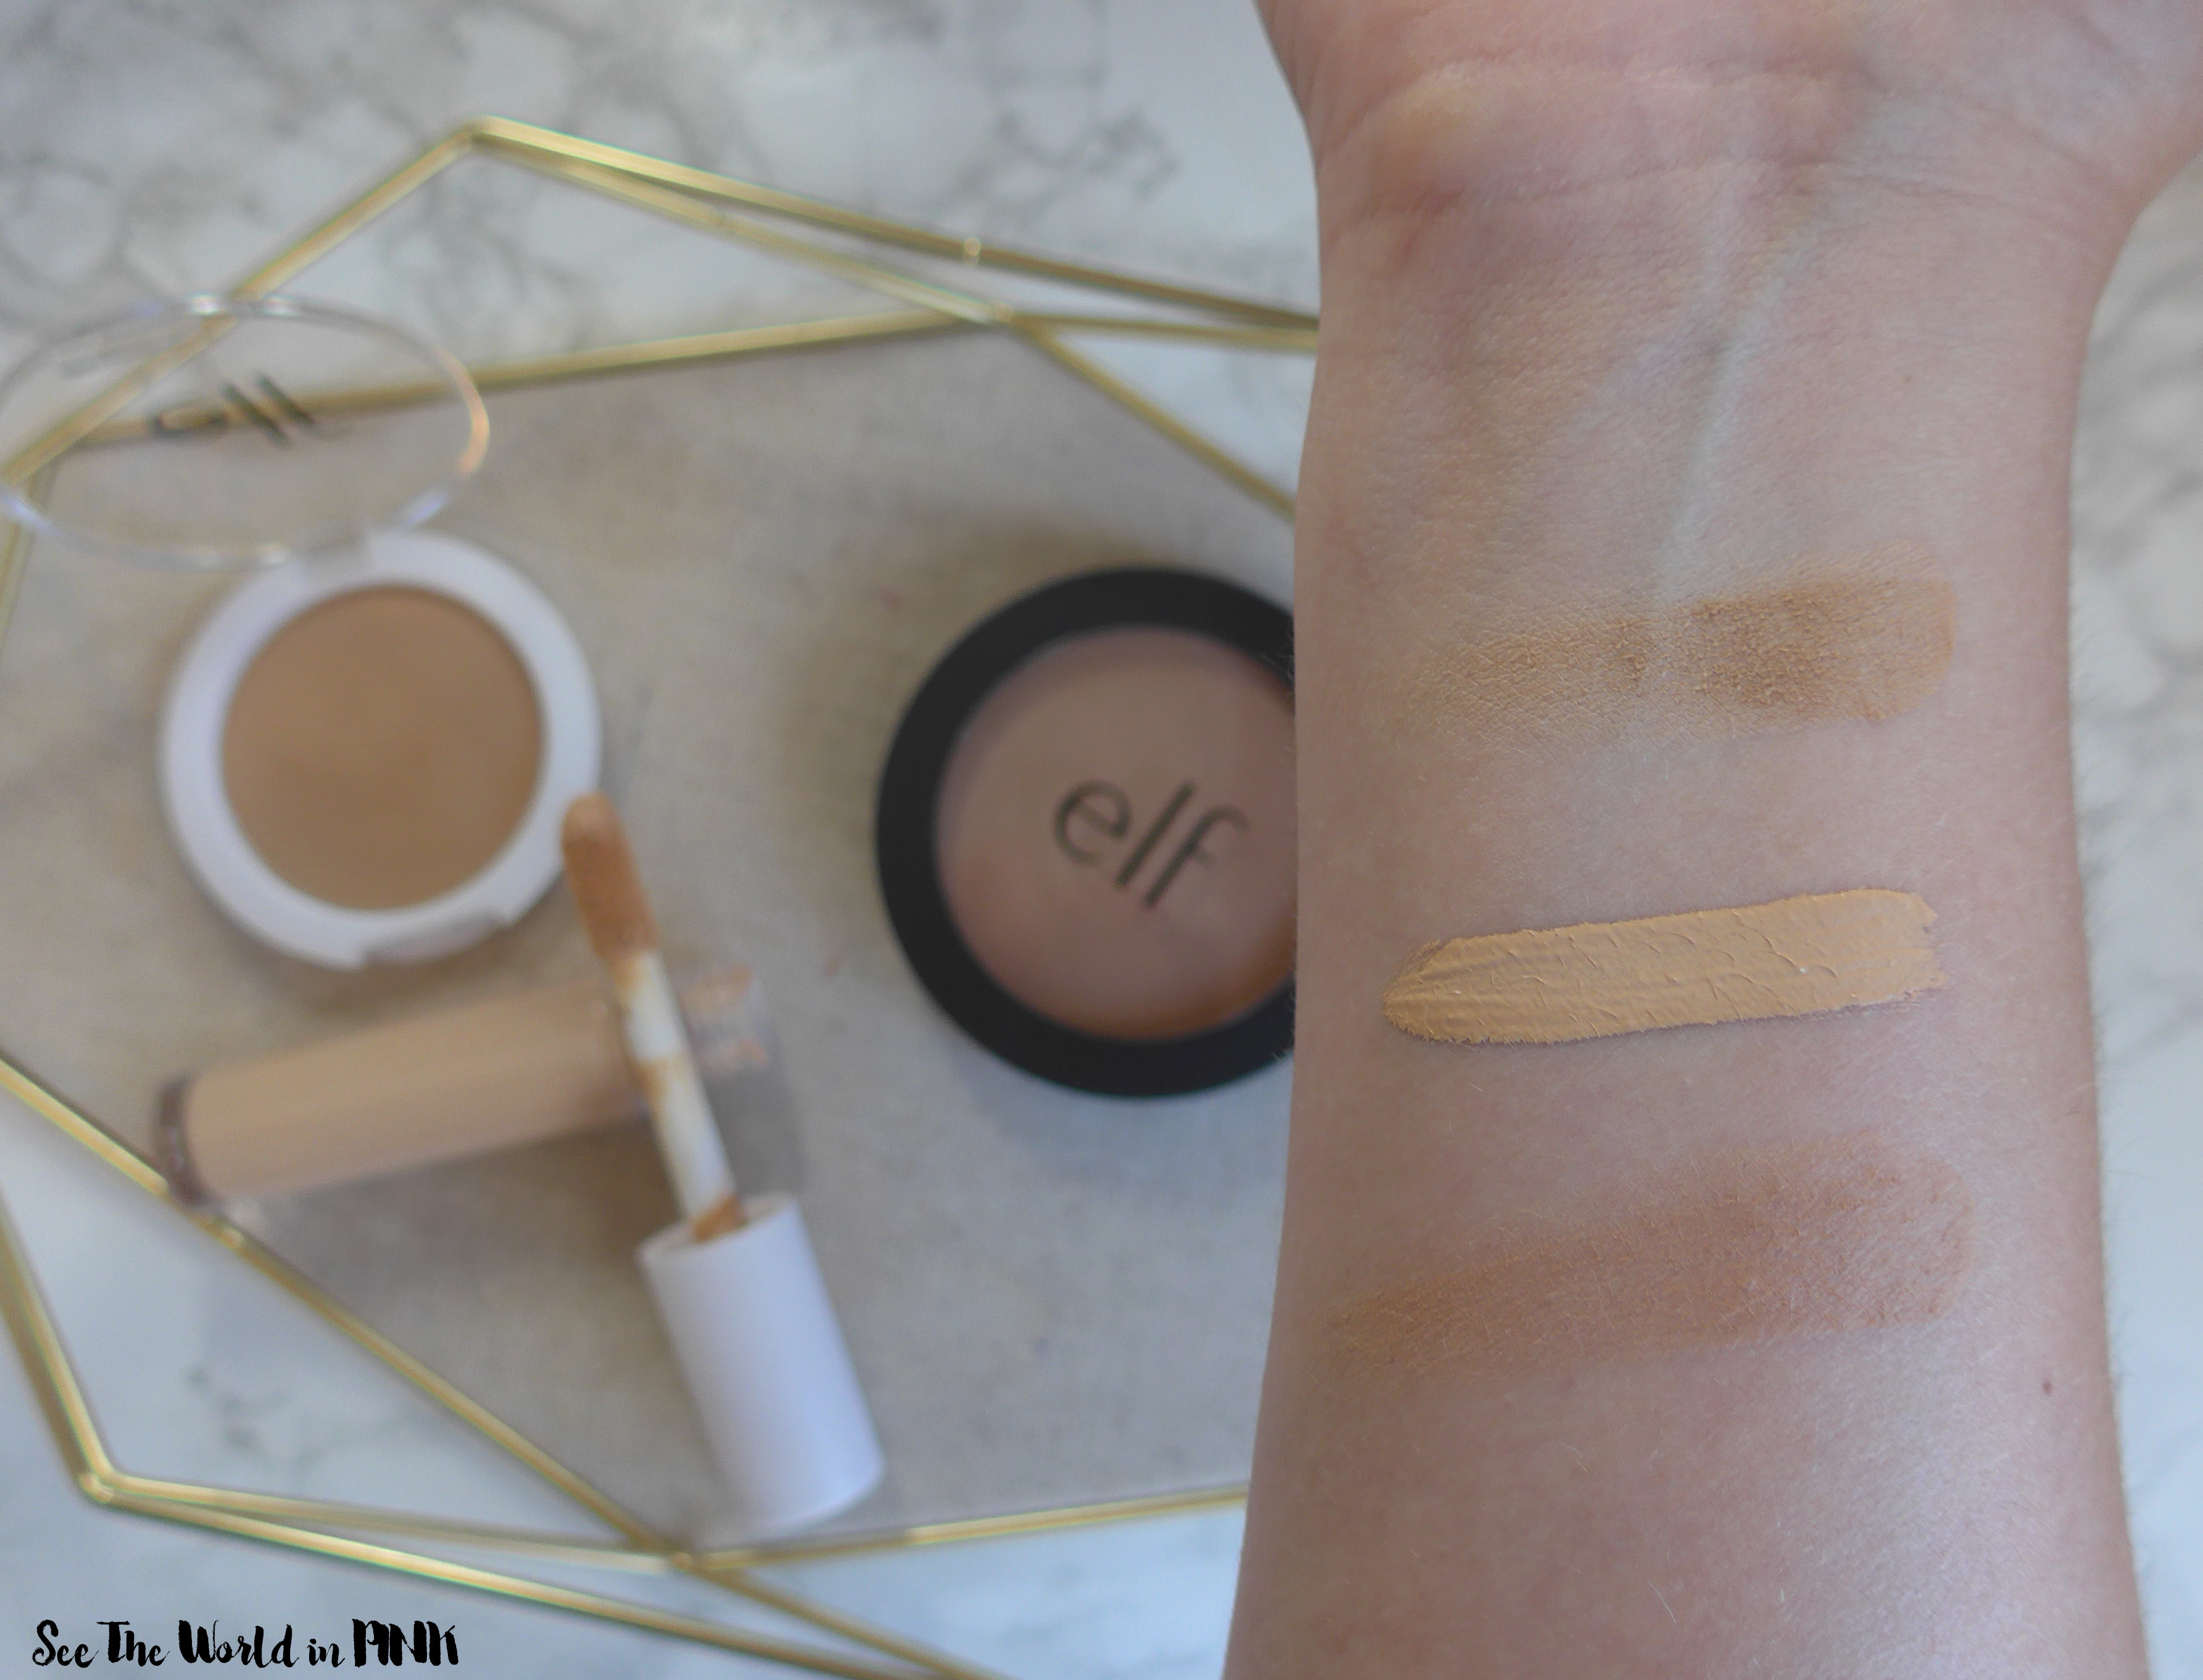 ELF Cosmetics - Huge Swatch & Thoughts Post ~ Primer Infused Bronzer, Camo Concealer, Bite Size Duos, Monochromatic Multi-sticks and More! See the World in PINK